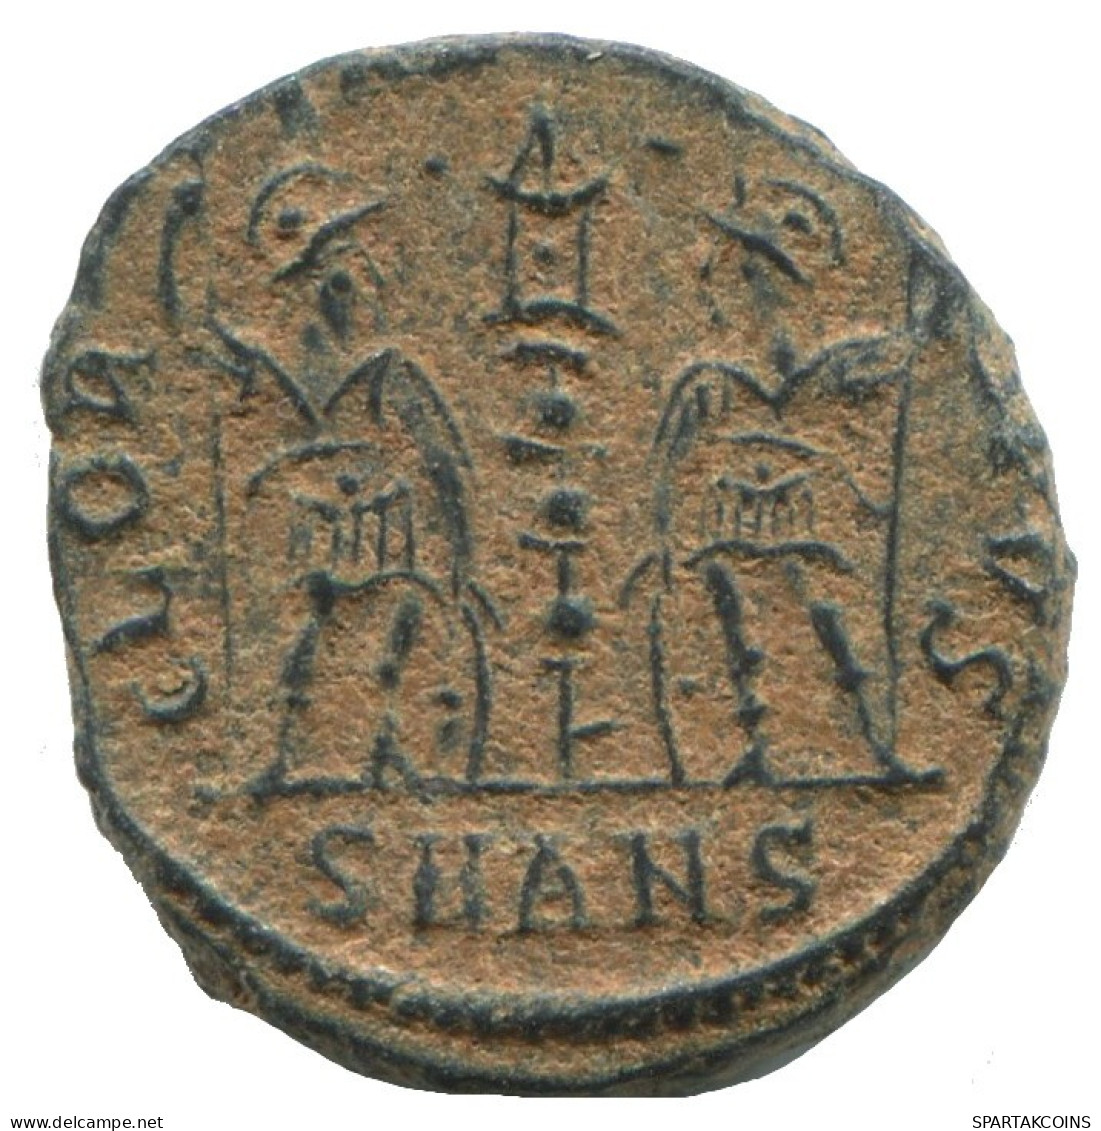 CONSTANTINE II Antioch SMANS AD330-335 GLORIA EXERCITVS 2,1g/15mm ANN1222.9.D.A - The Christian Empire (307 AD Tot 363 AD)